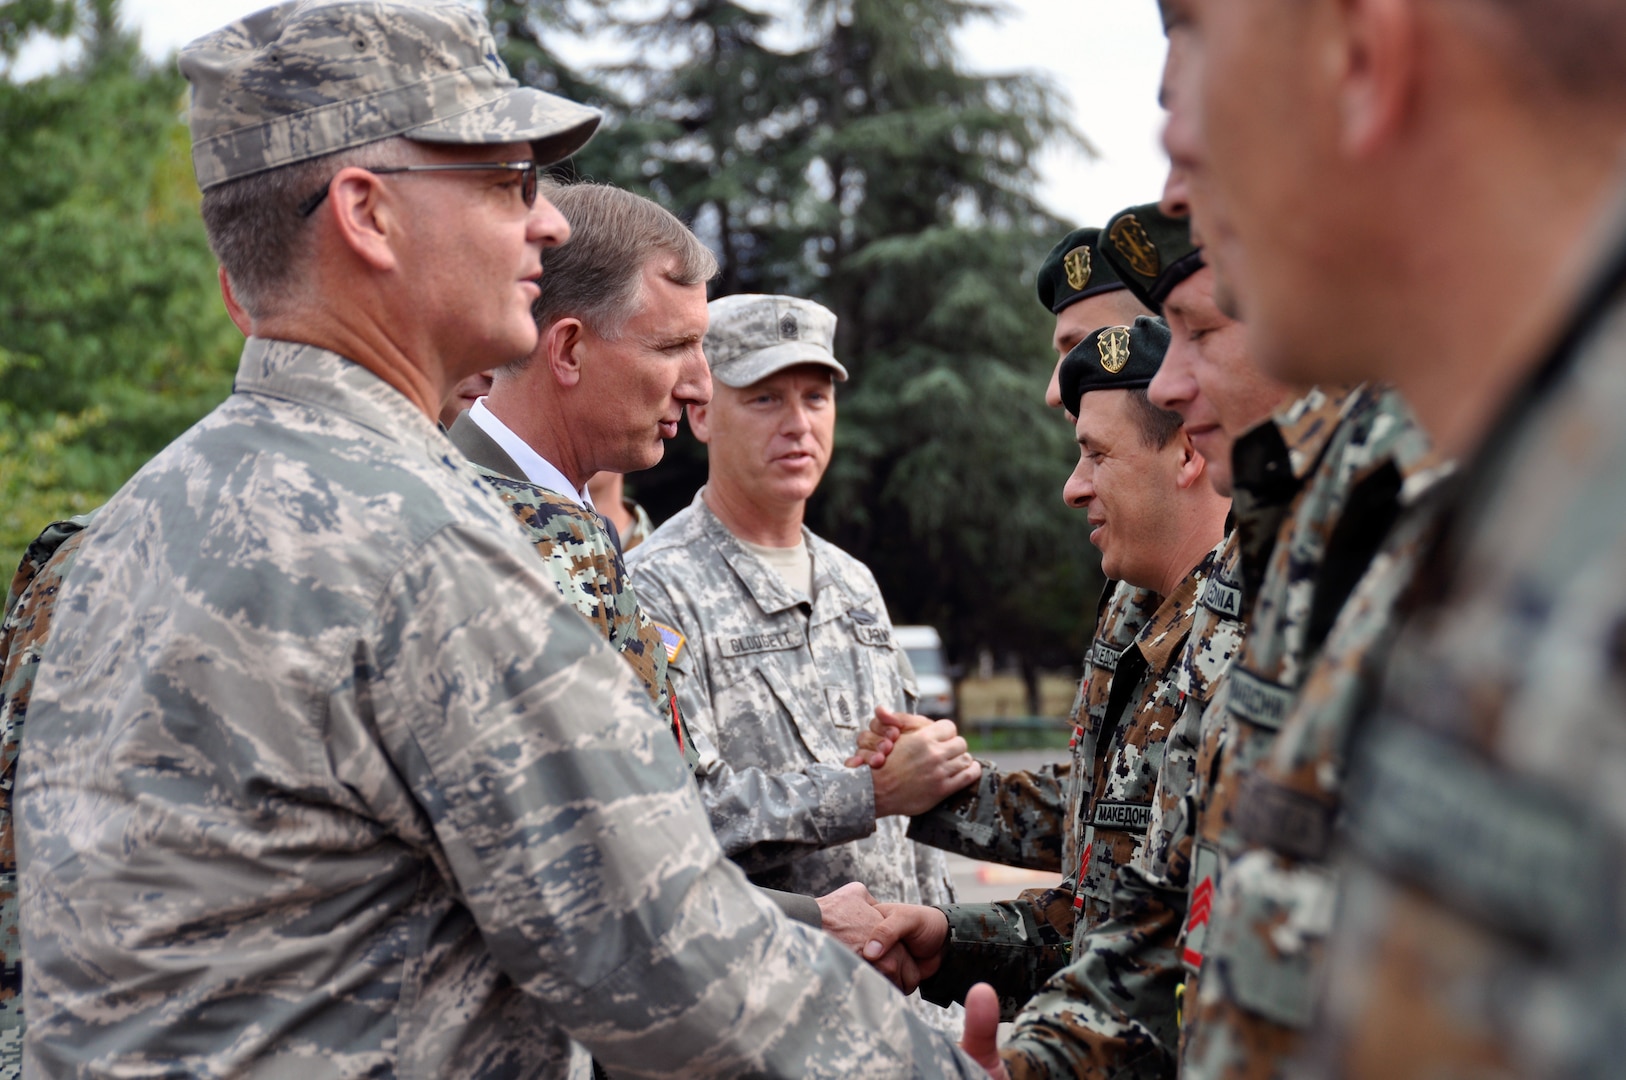 U.S. Air Force Maj. Gen. Steven Cray, the adjutant general of the Vermont National Guard, U.S. Ambassador Paul Wholers, and U.S. Army Sgt. Maj. Forrest Glodgett pass out medals and accolades to 79 Soldiers from the Army of the Republic of Macedonia at Illenden Barracks, Skopje, Macedonia, Sept. 12, 2013.